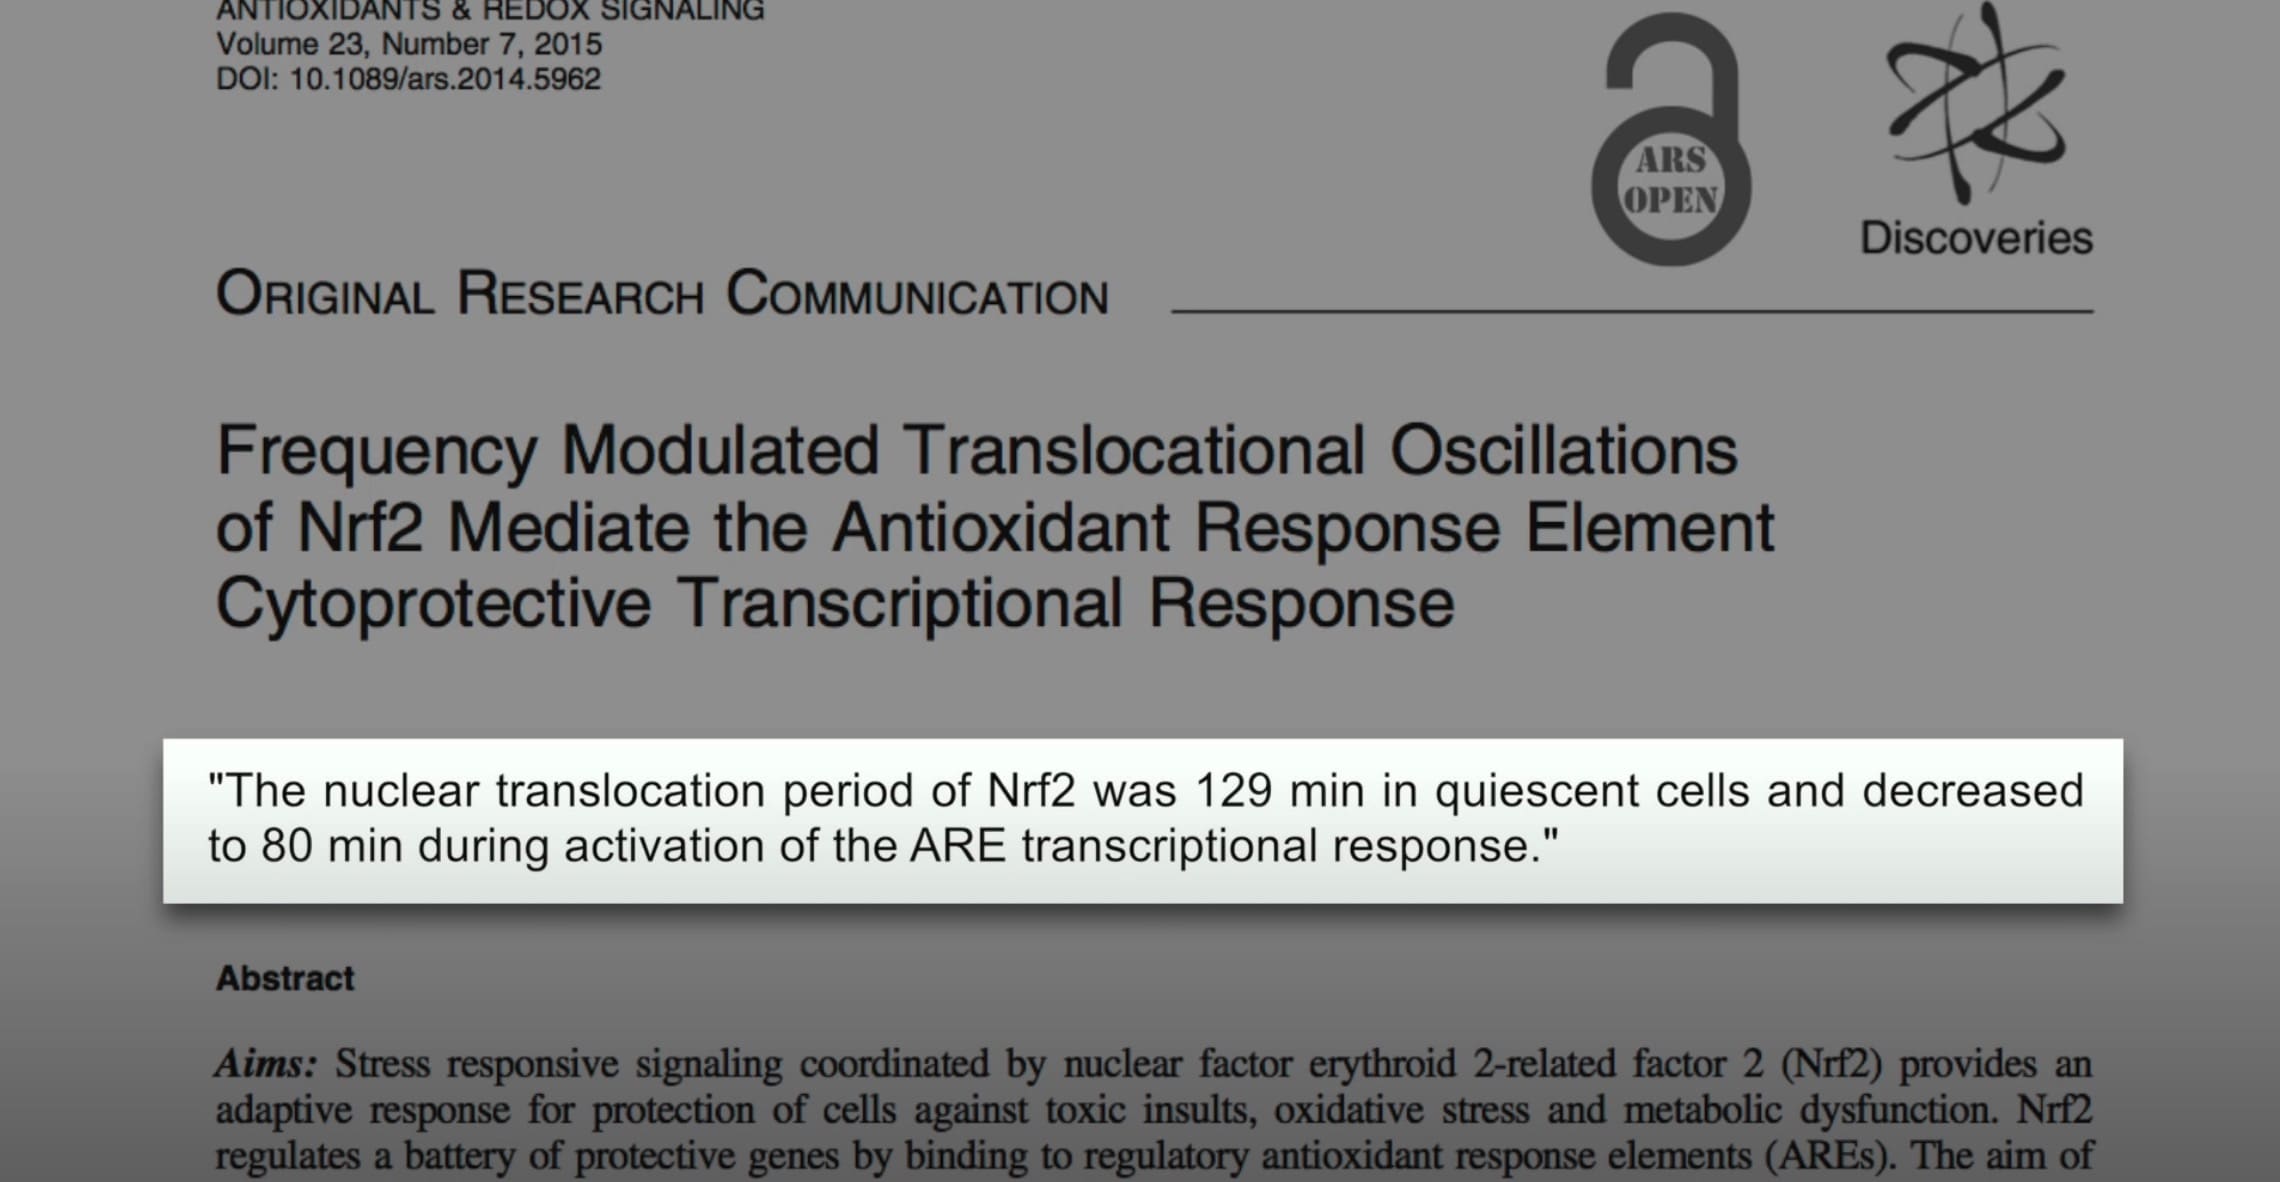 Frequency Modulated Translocational Oscillations of Nrf2 Mediate the Antioxidant Response Element Cytoprotective Transcriptional Response